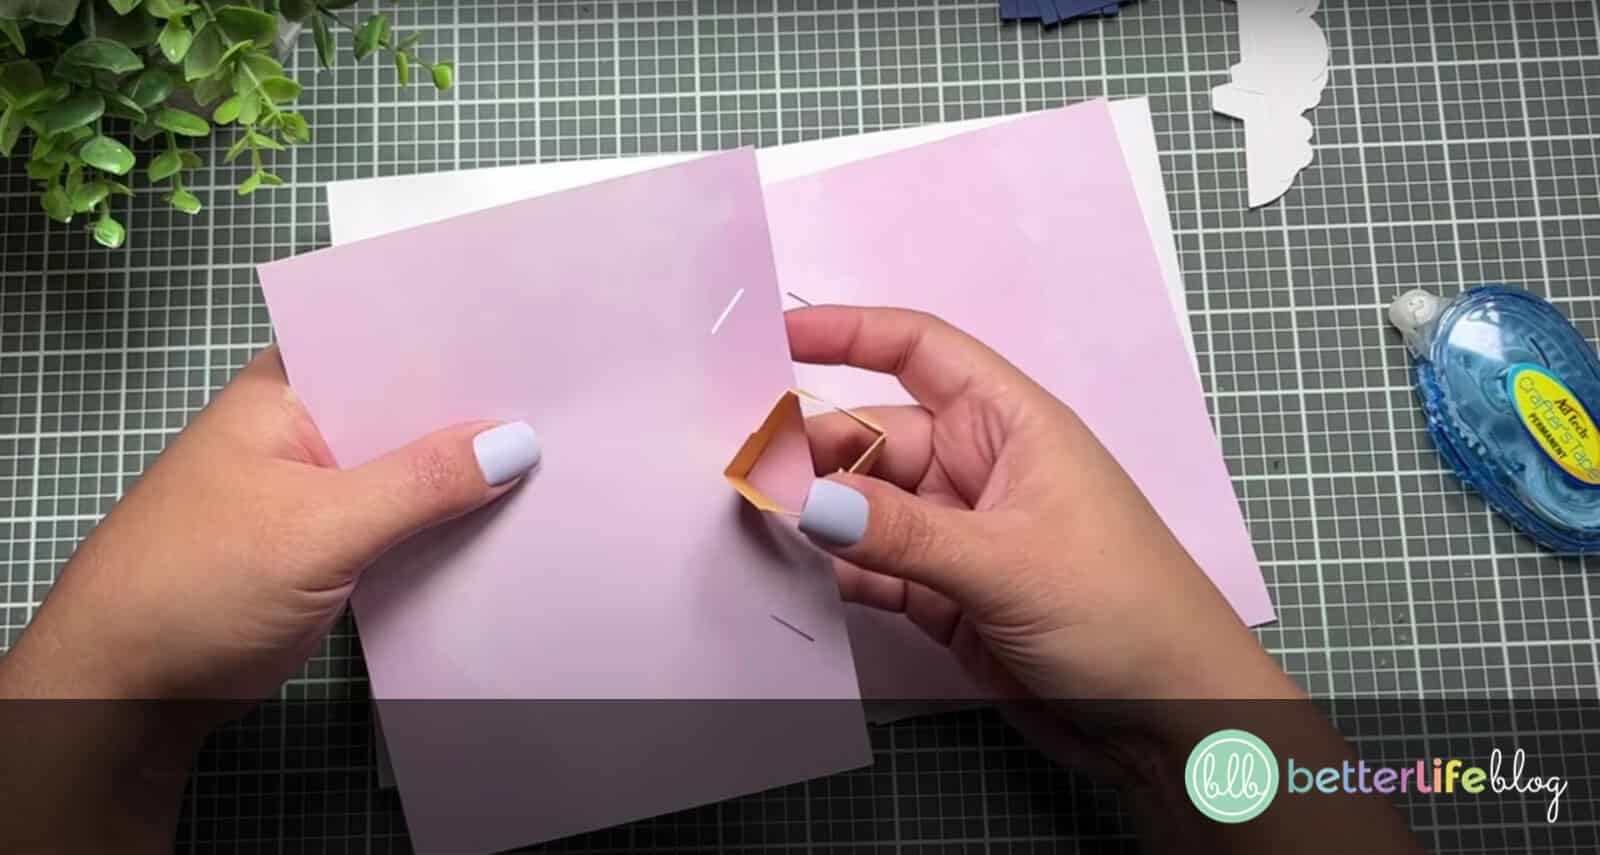 Inserting Hot Air Balloon Pop-Up Card base into the center of the card